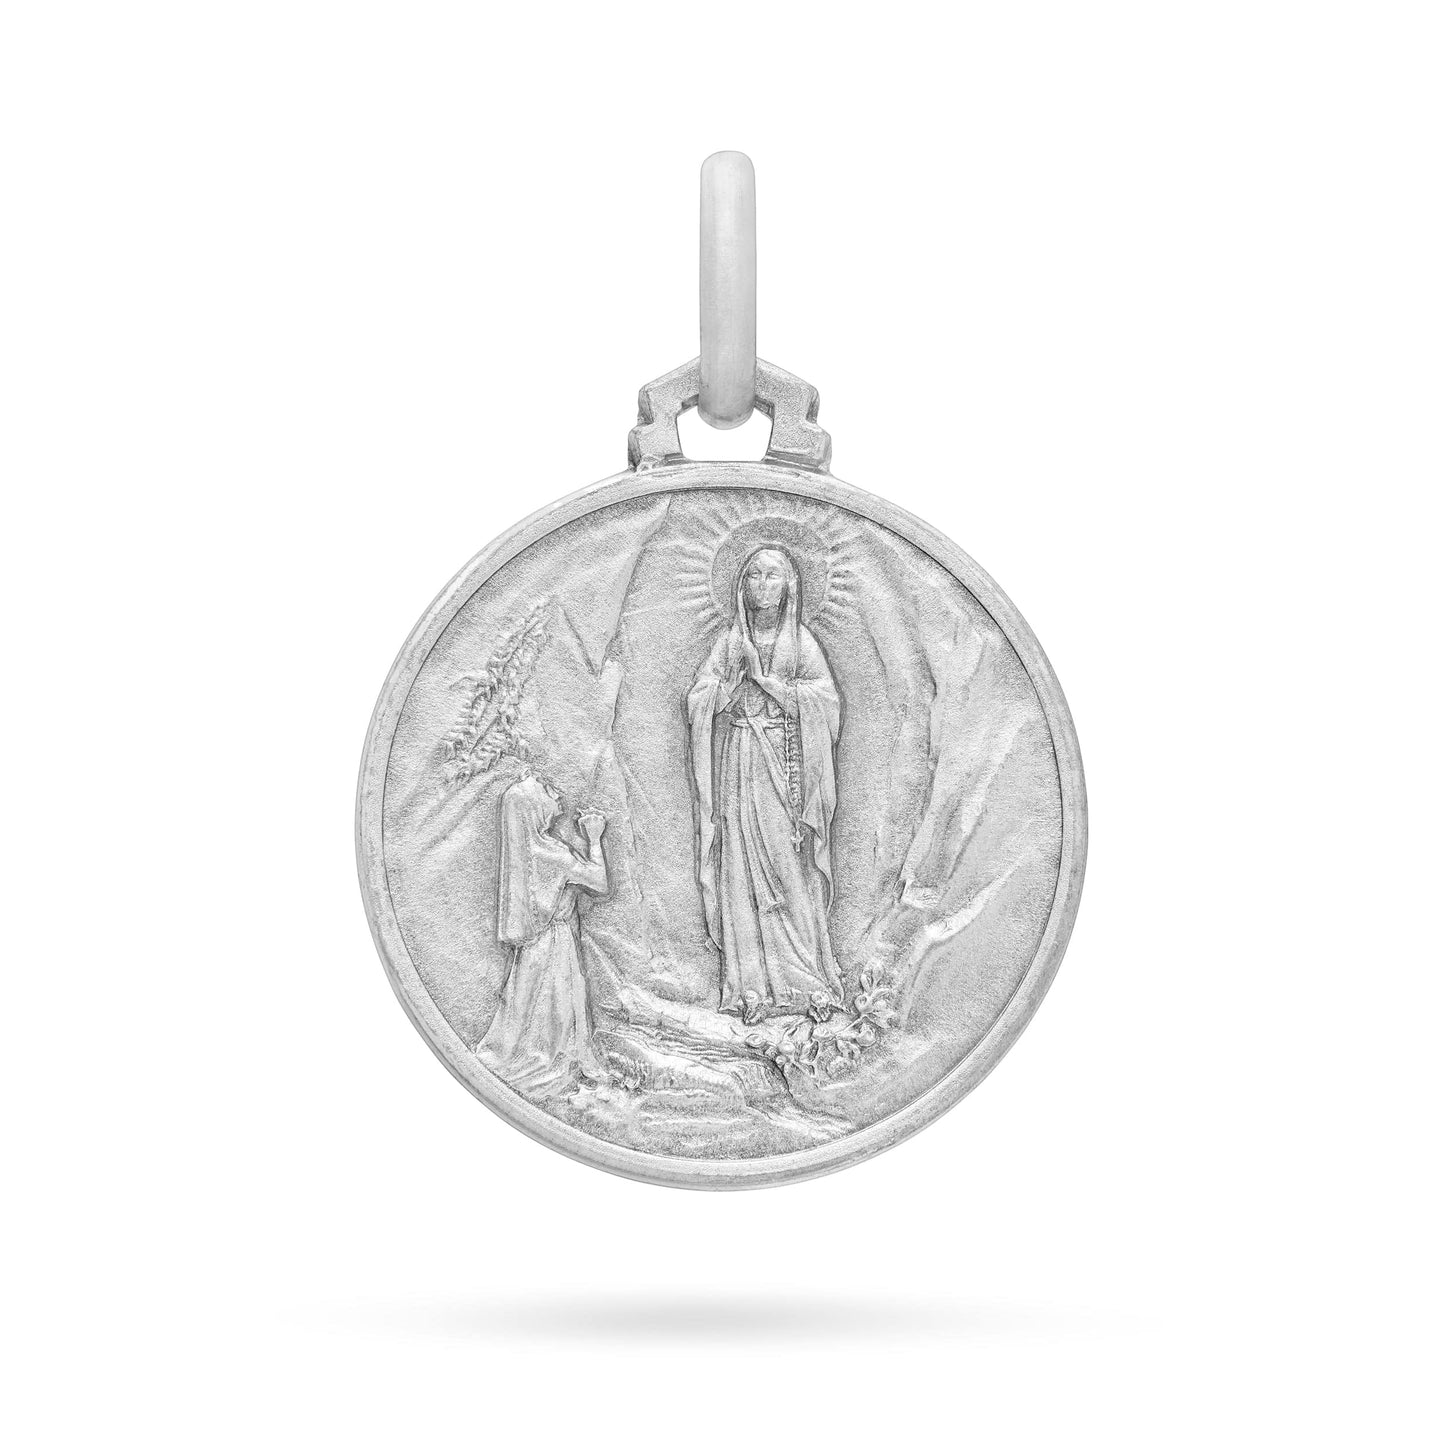 MONDO CATTOLICO Medal 18 mm (0.70 in) Silver medal of Our Lady of Lourdes